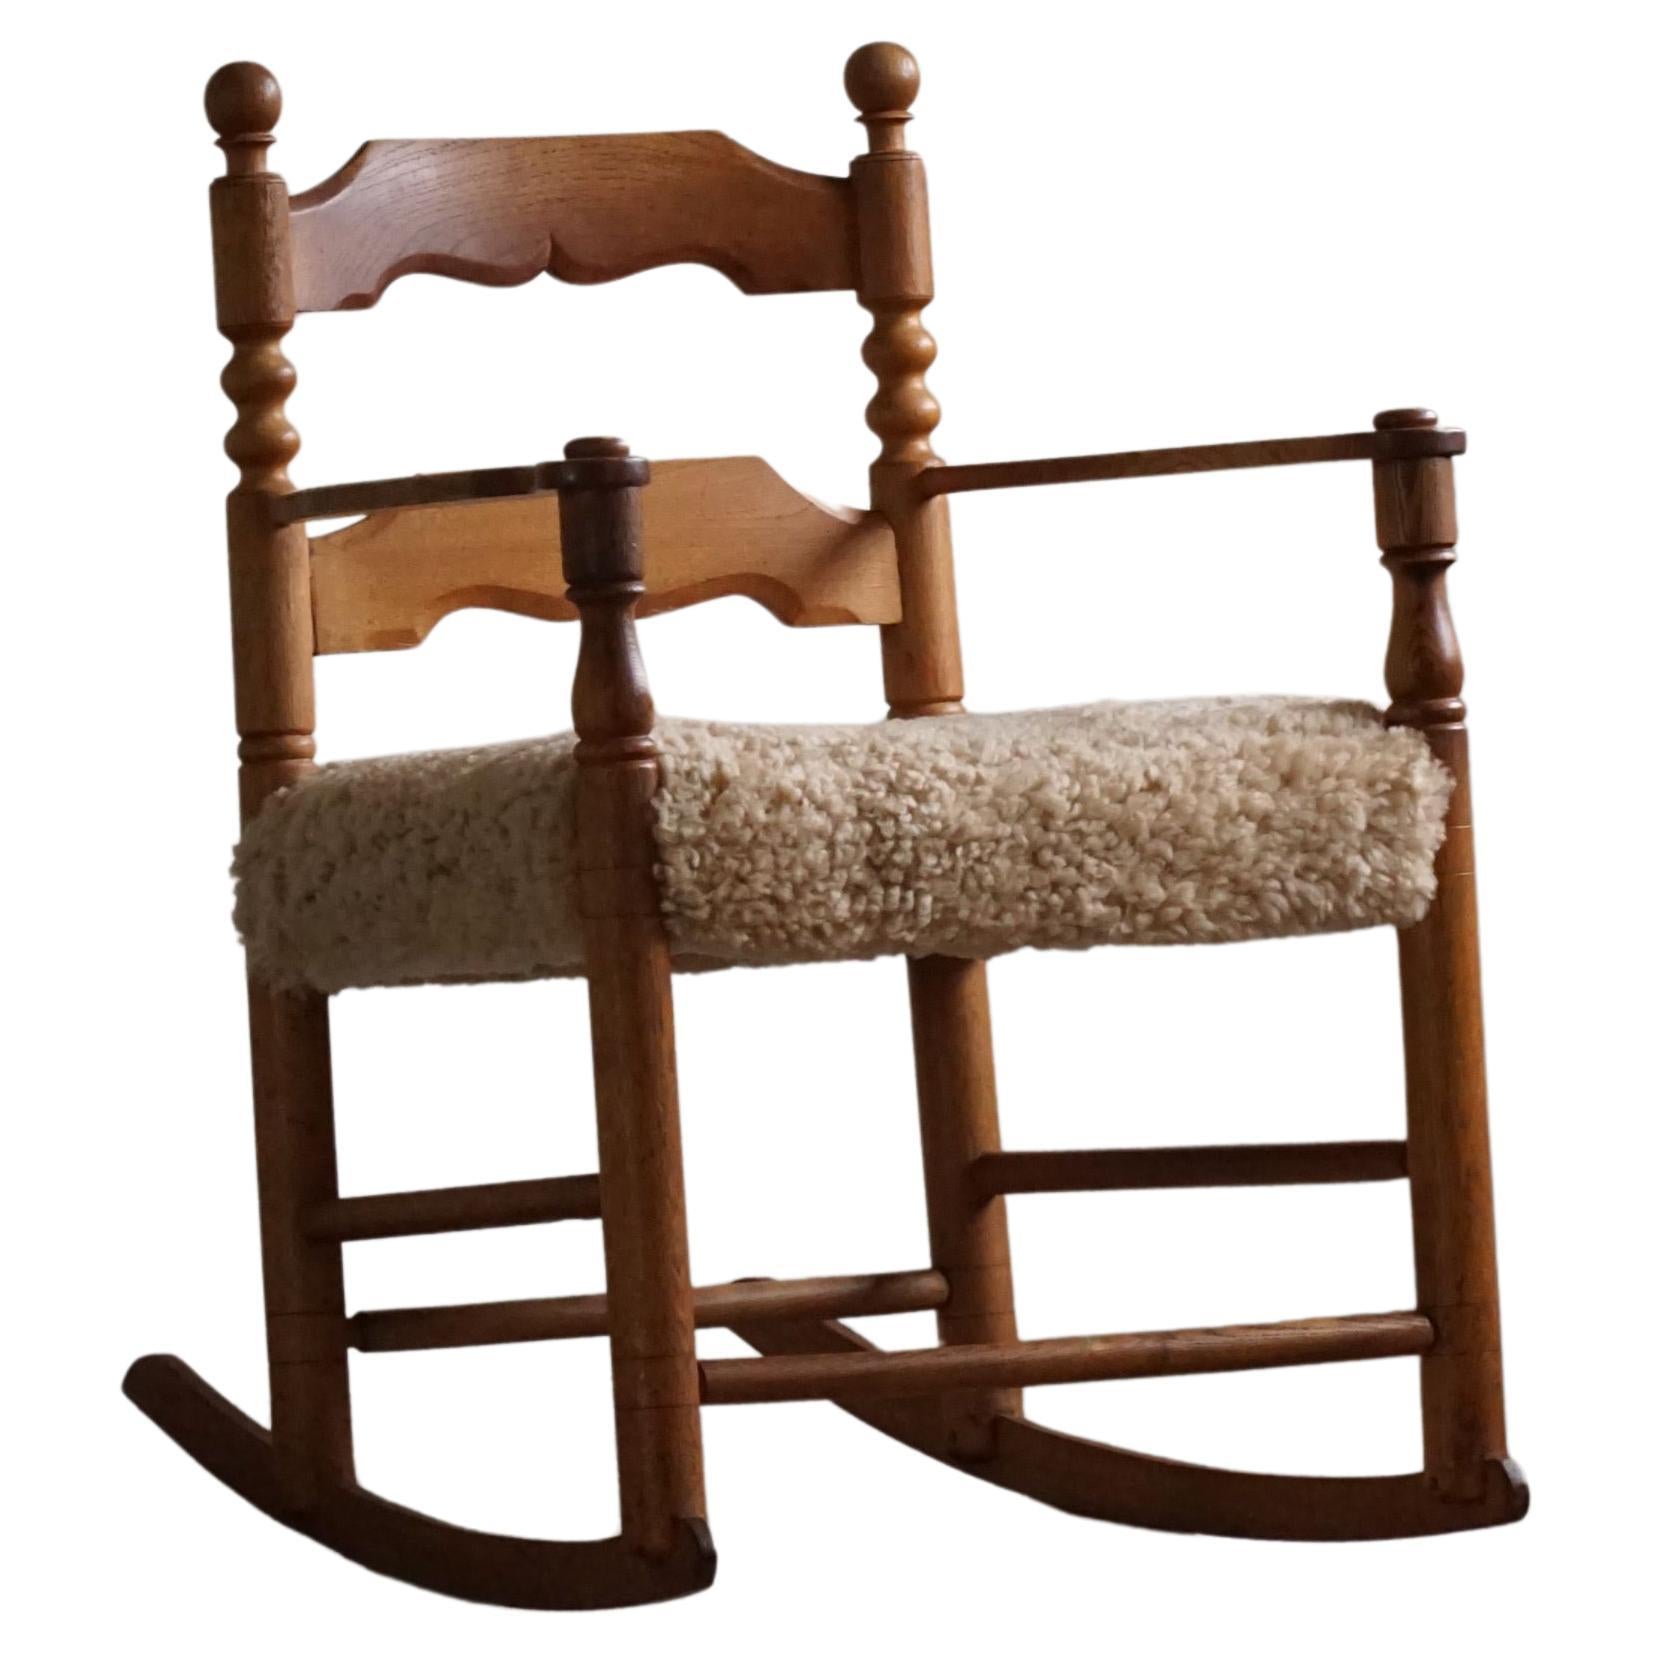 French Modern, Rocking Chair, Oak & Lambswool, Charles Dudouyt Style, 1950s